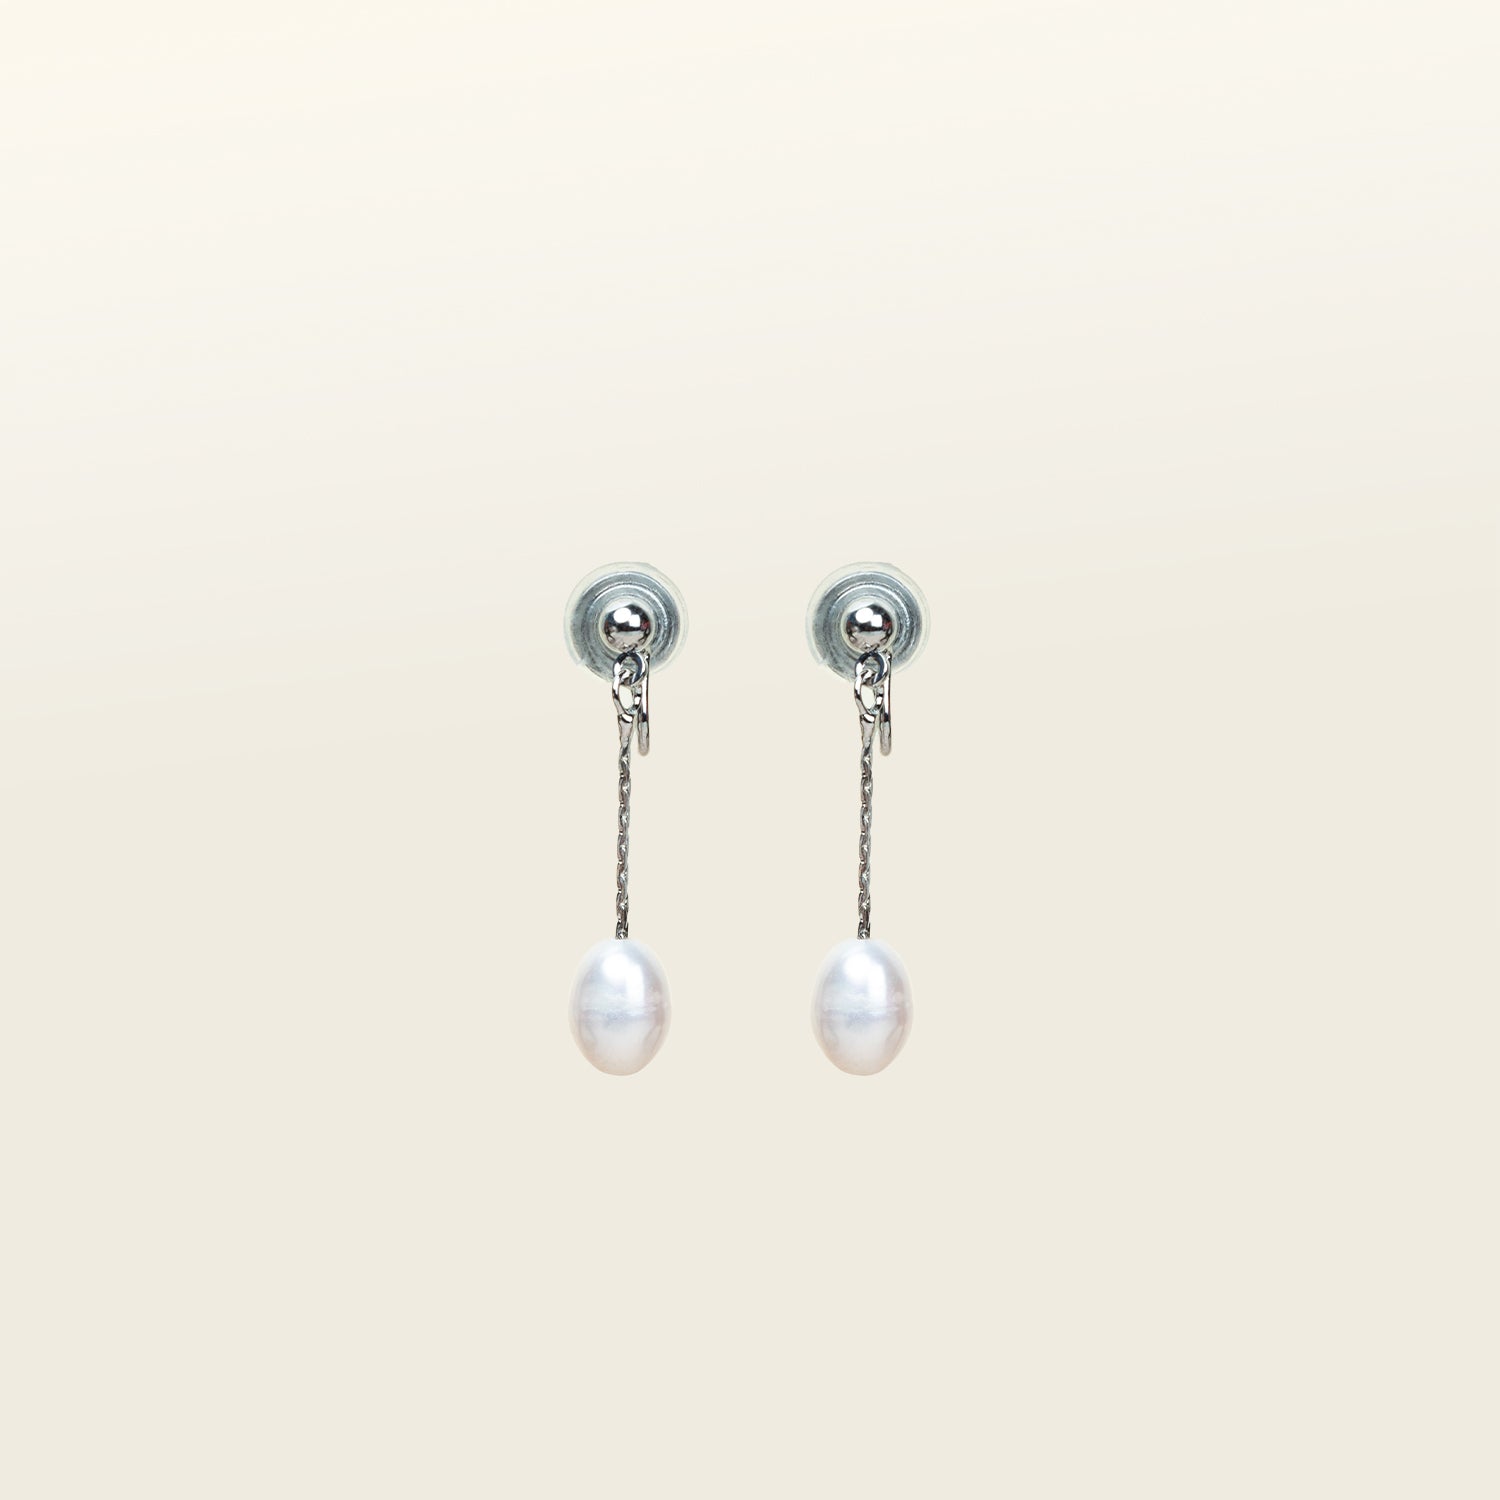 Silver-plated brass mosquito coil clip-on earrings adorned with lustrous freshwater pearls. Suitable for all ear types, offering a medium secure hold for comfortable 24-hour wear. 